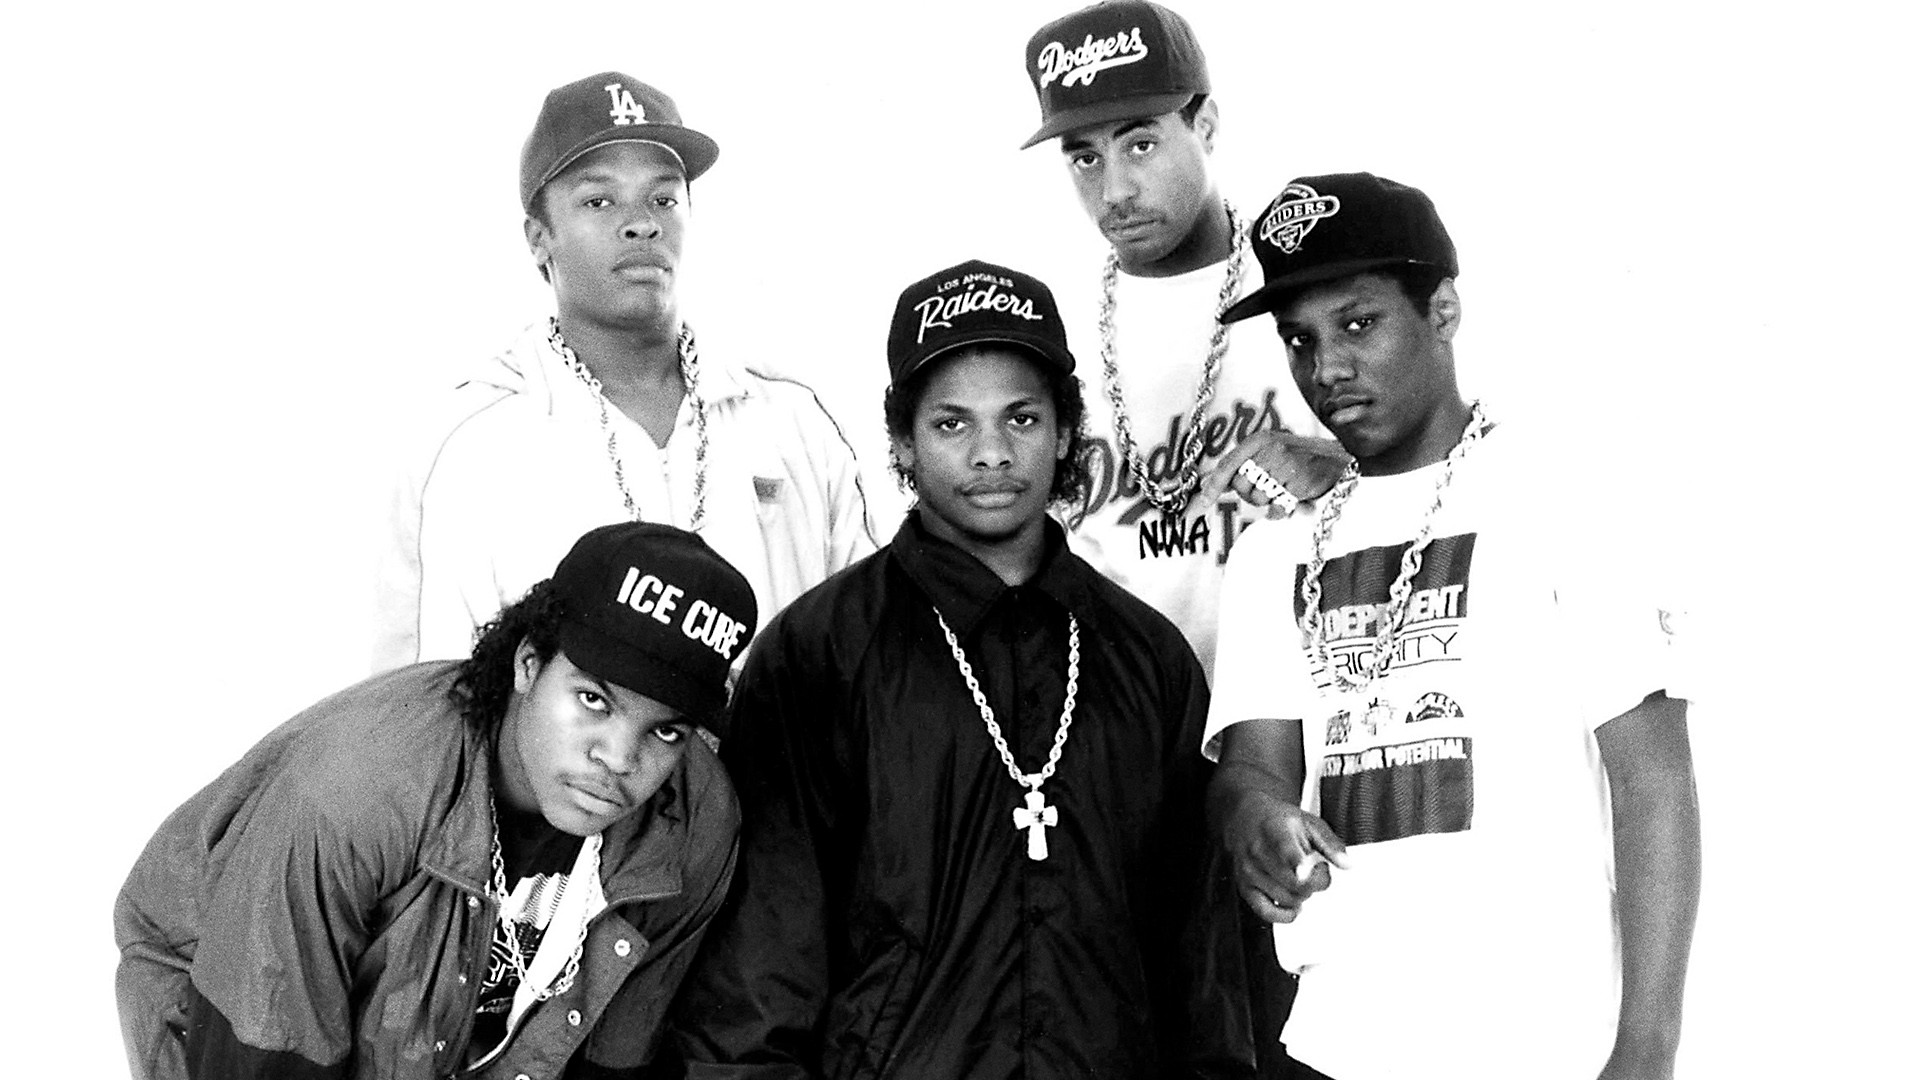 NWA wallpaper ·① Download free full HD backgrounds for ...